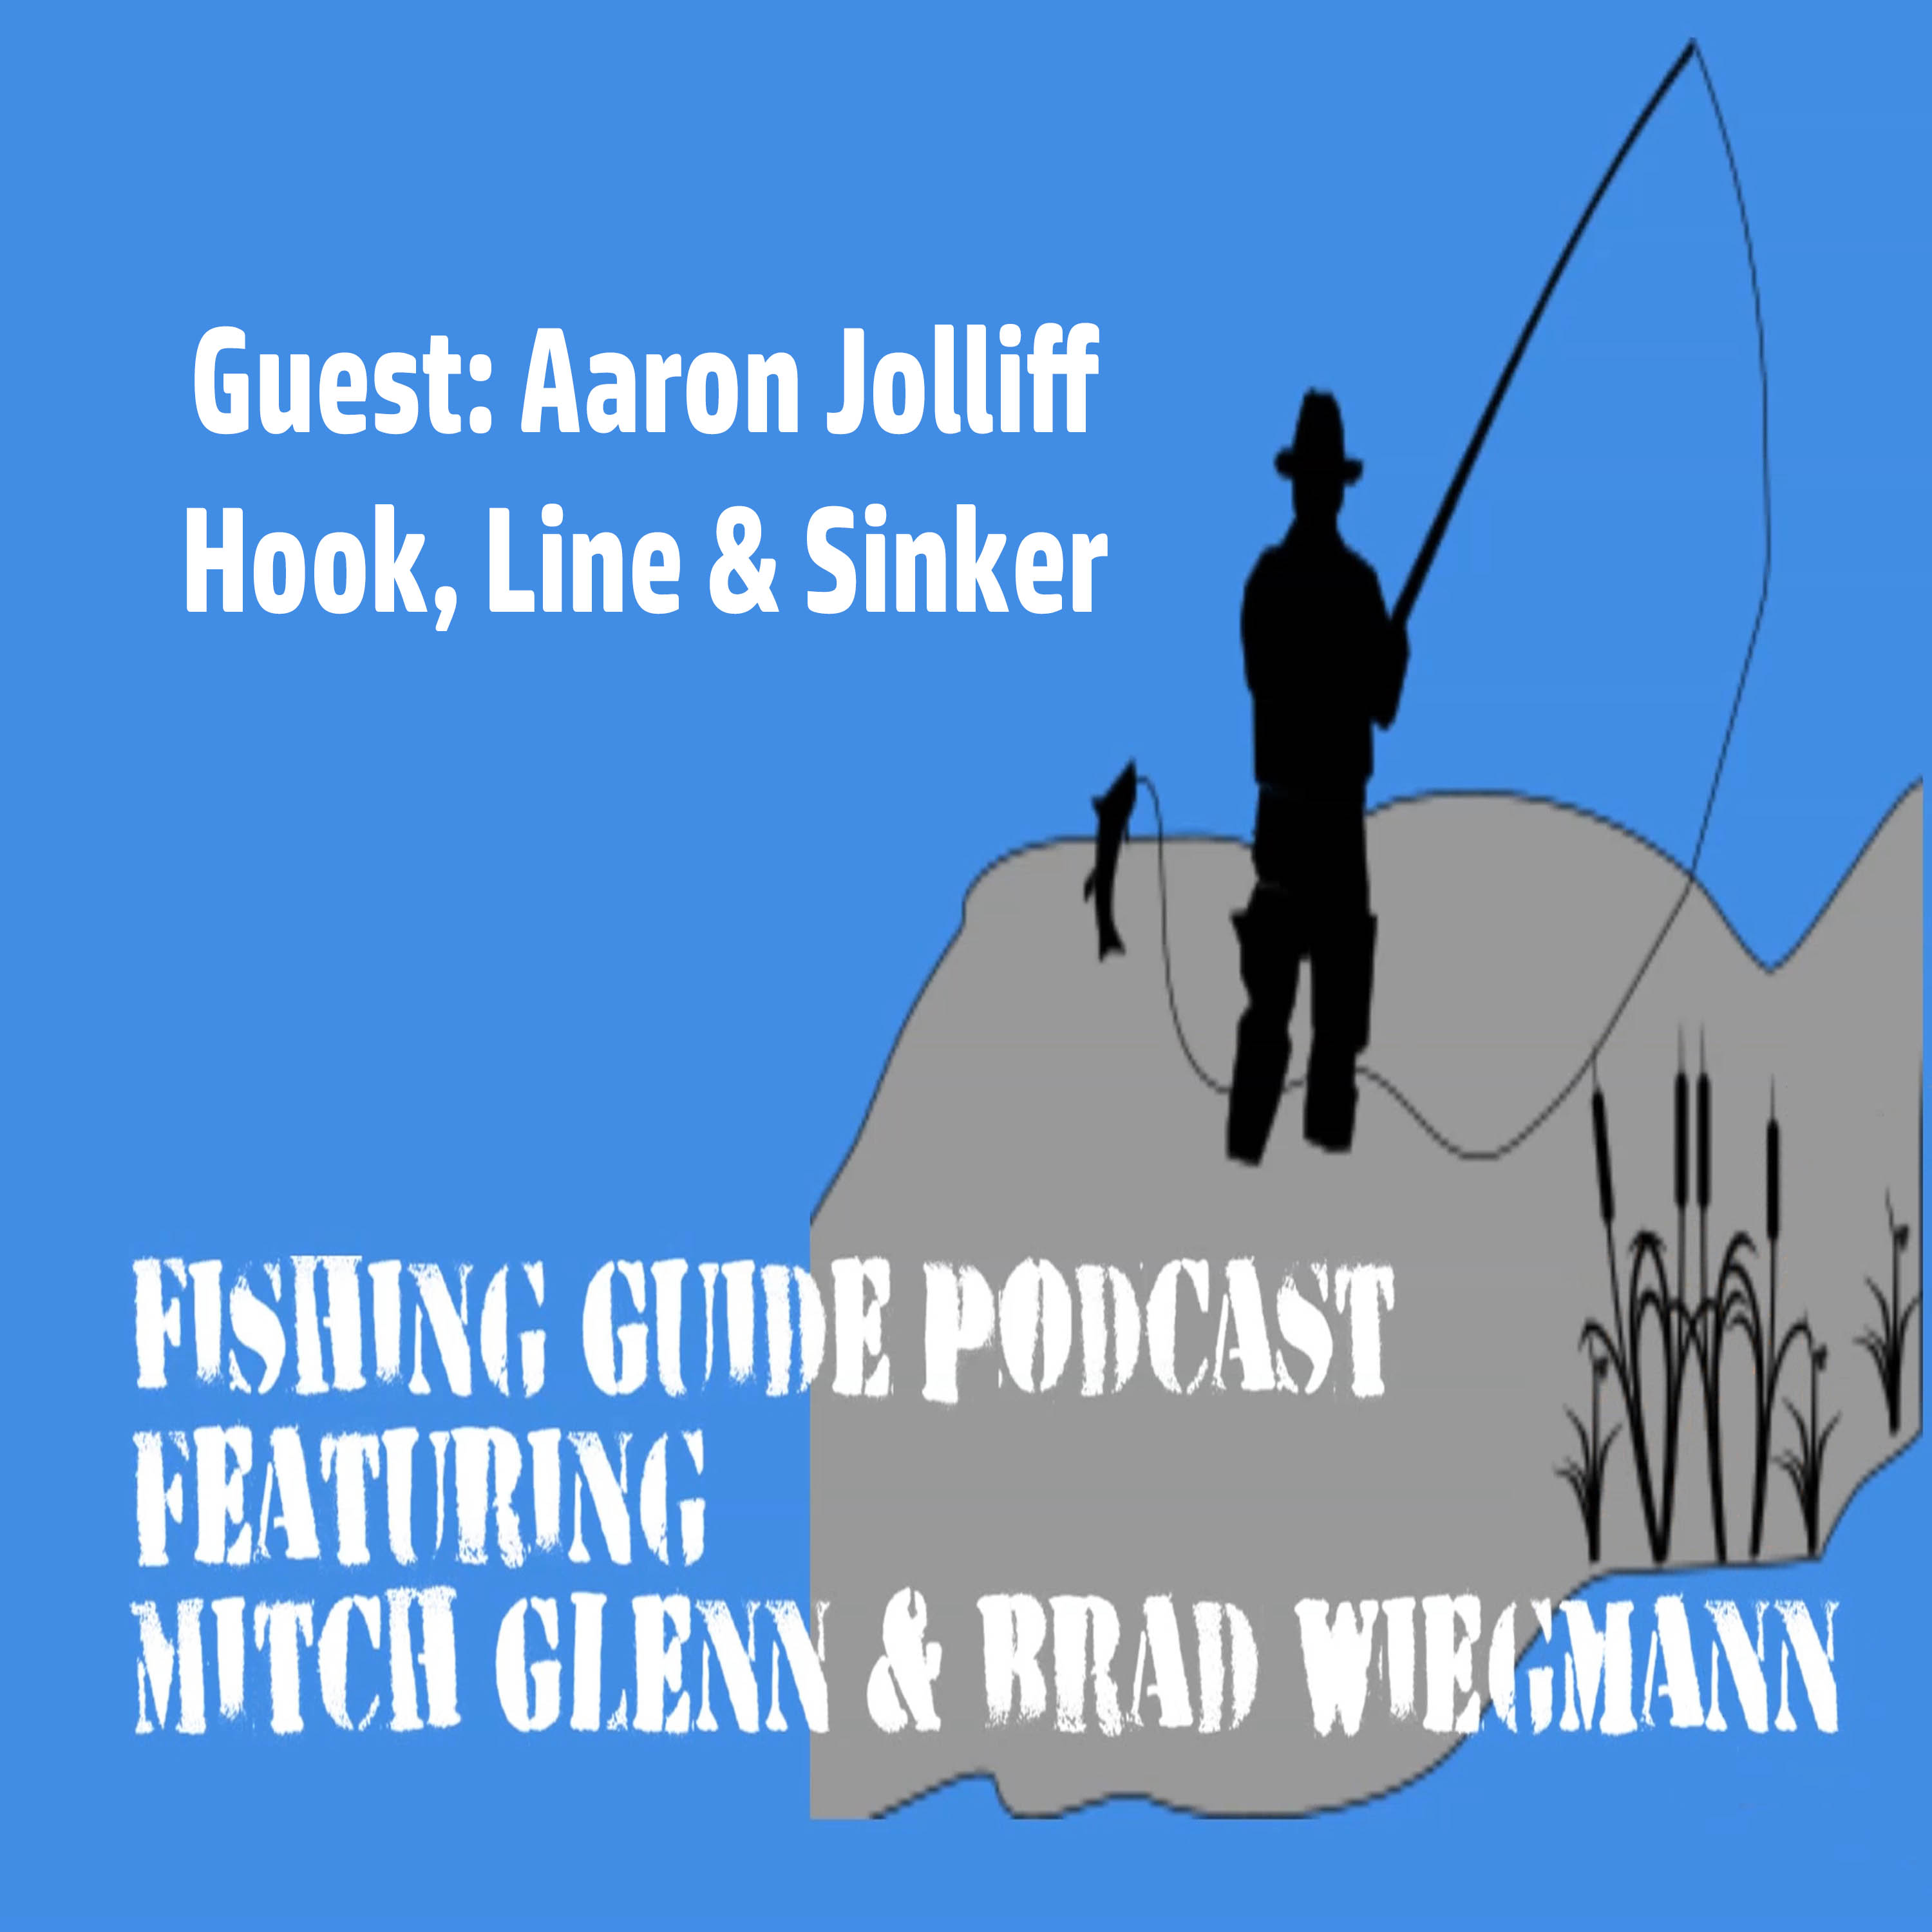 Hook, Line and Sinker owner Aaron Jolliff tells all about his store and hot lures: Episode 6